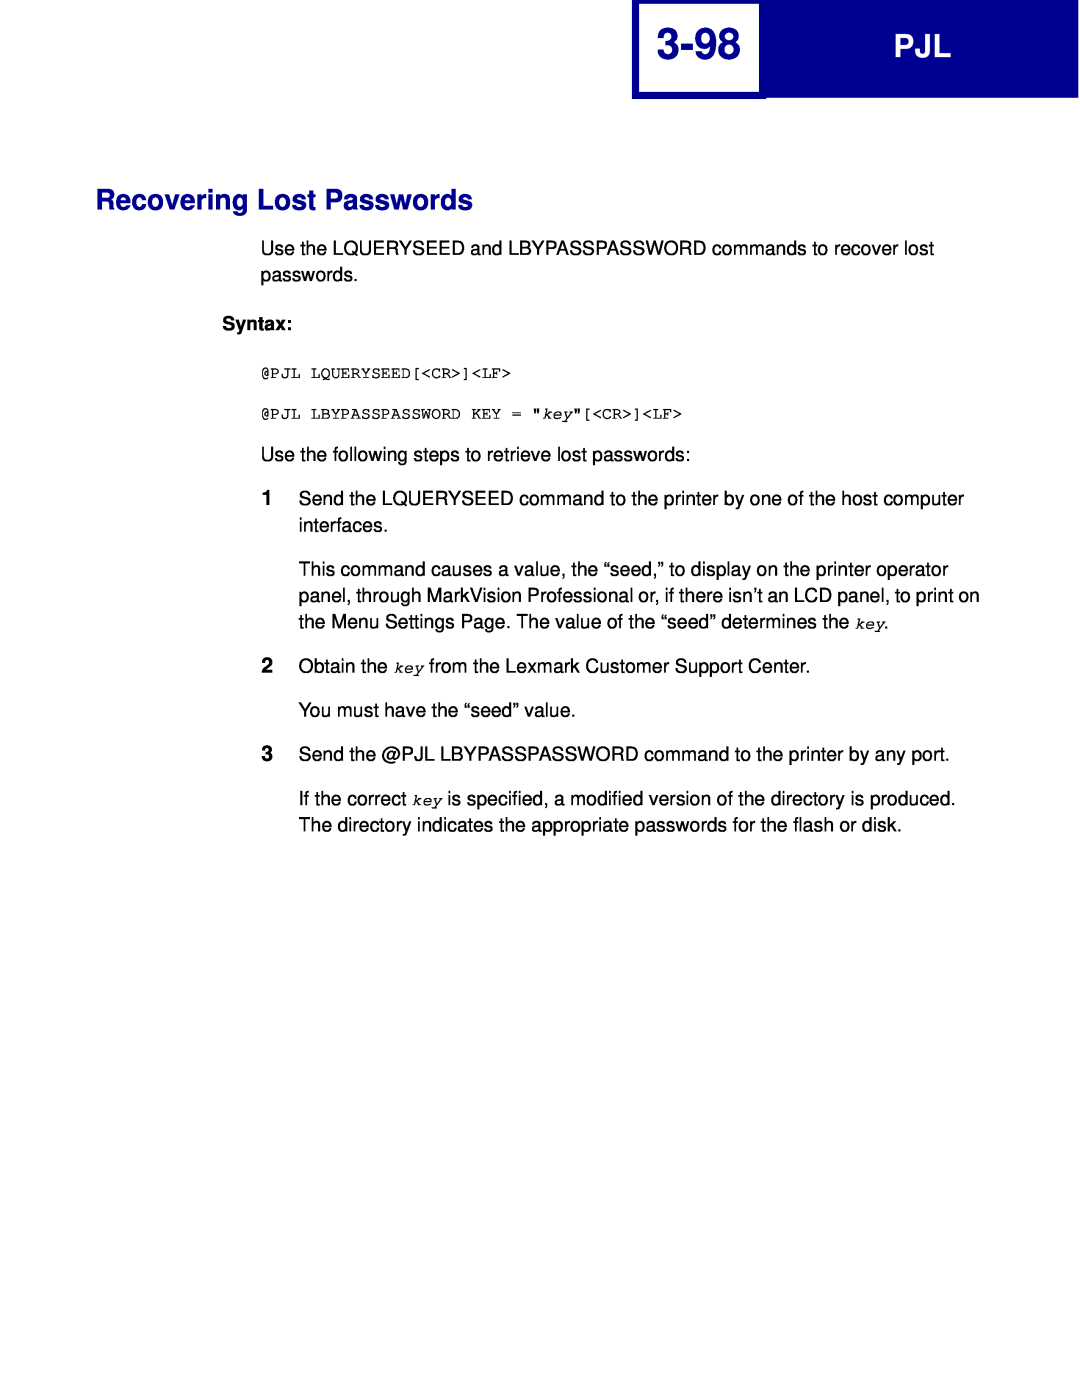 Lexmark C762, C760 manual 3-98, Recovering Lost Passwords, Syntax 